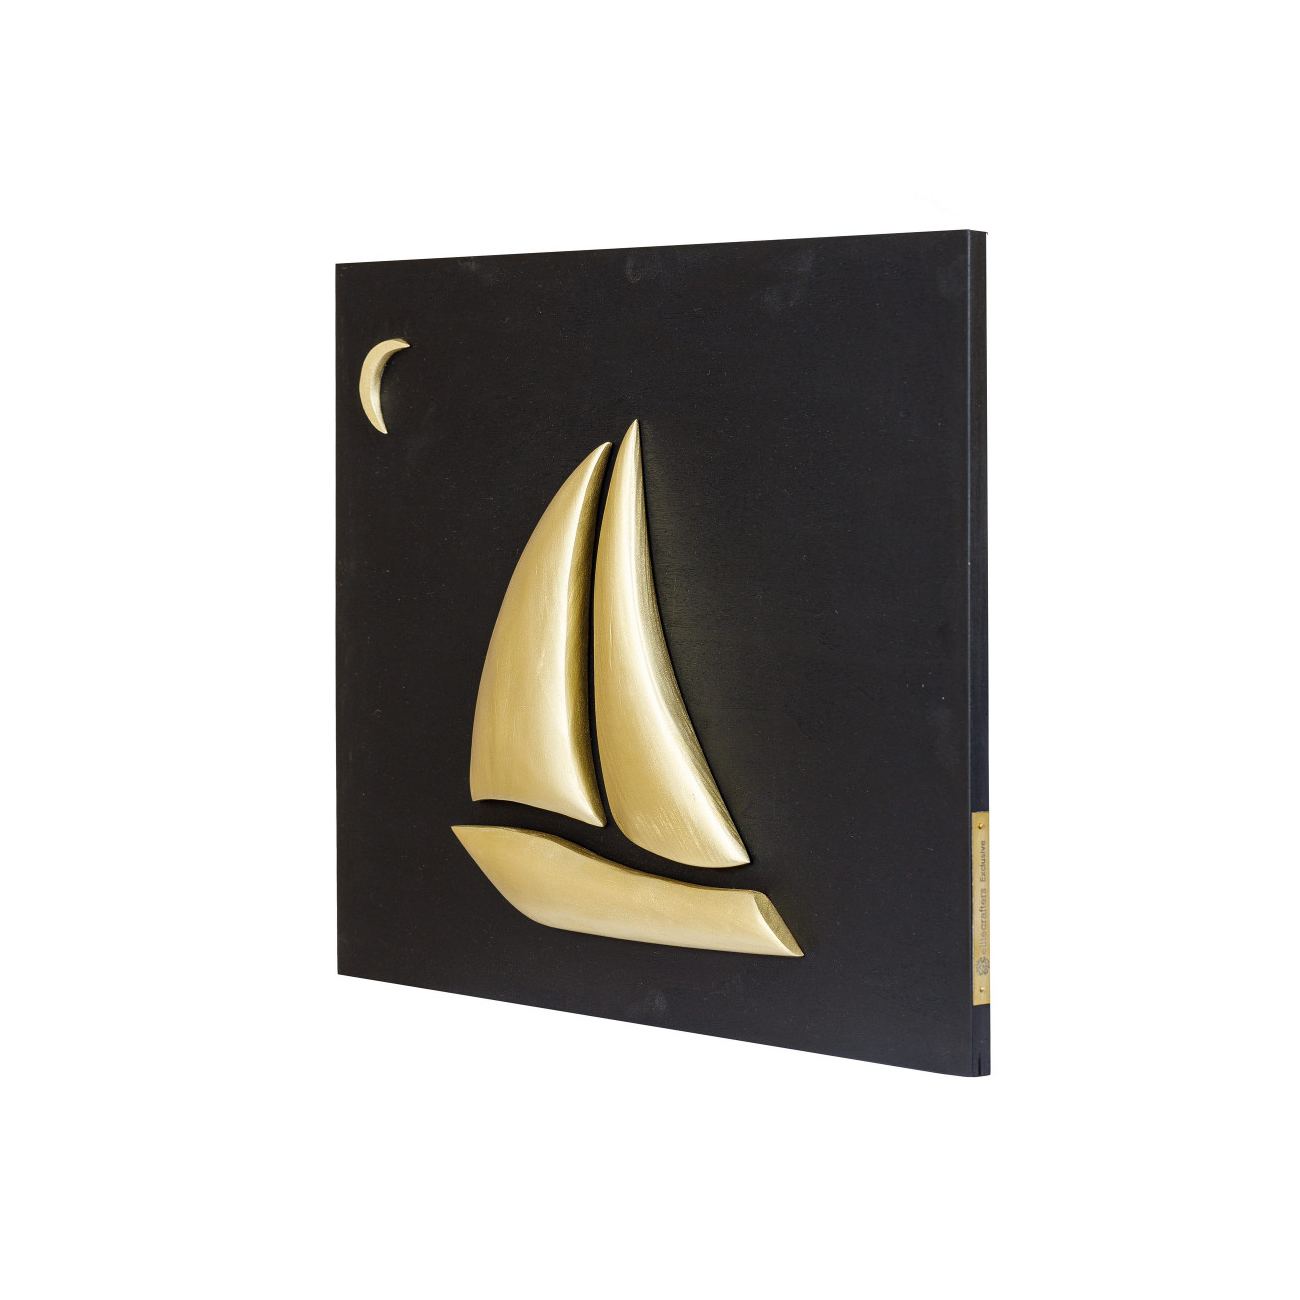 Gold Color Wooden Sailboat, Handmade Modern Wall Decor, Black Wooden  Background, Design A, 45x35cm. Ideal Decoration Gift.